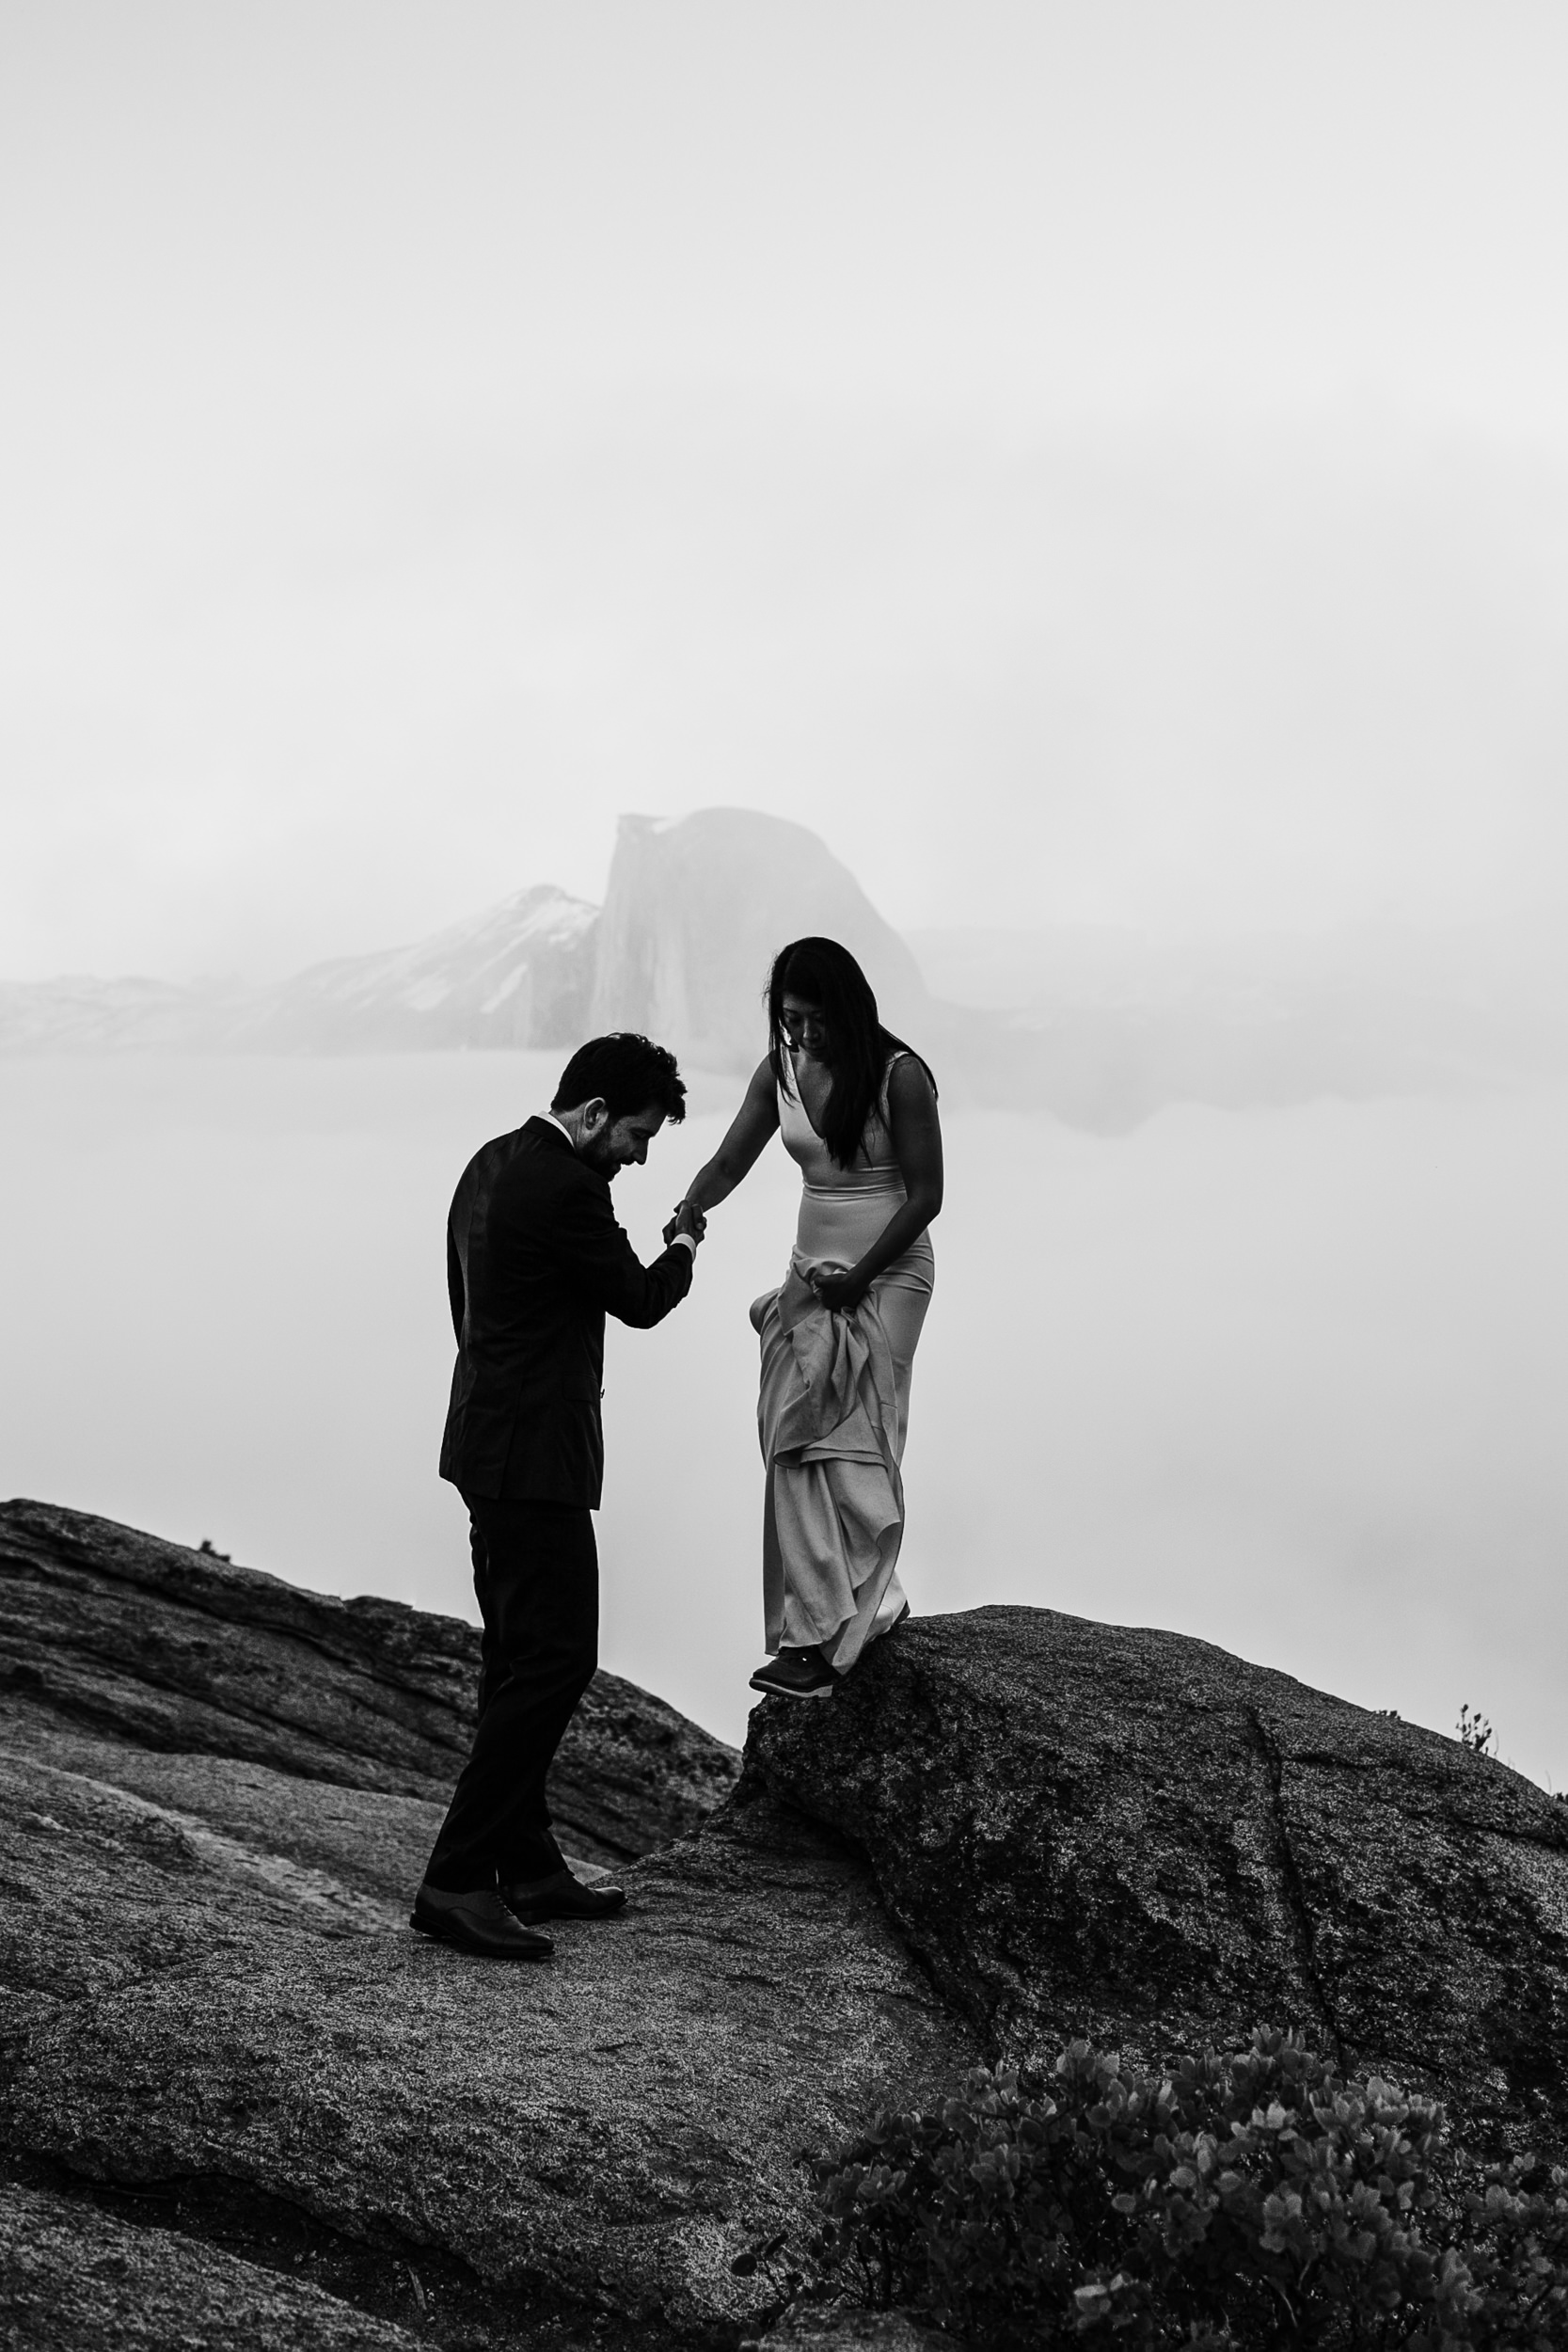 adventurous elopement wedding session in yosemite national park | glacier point wedding photography | the hearnes